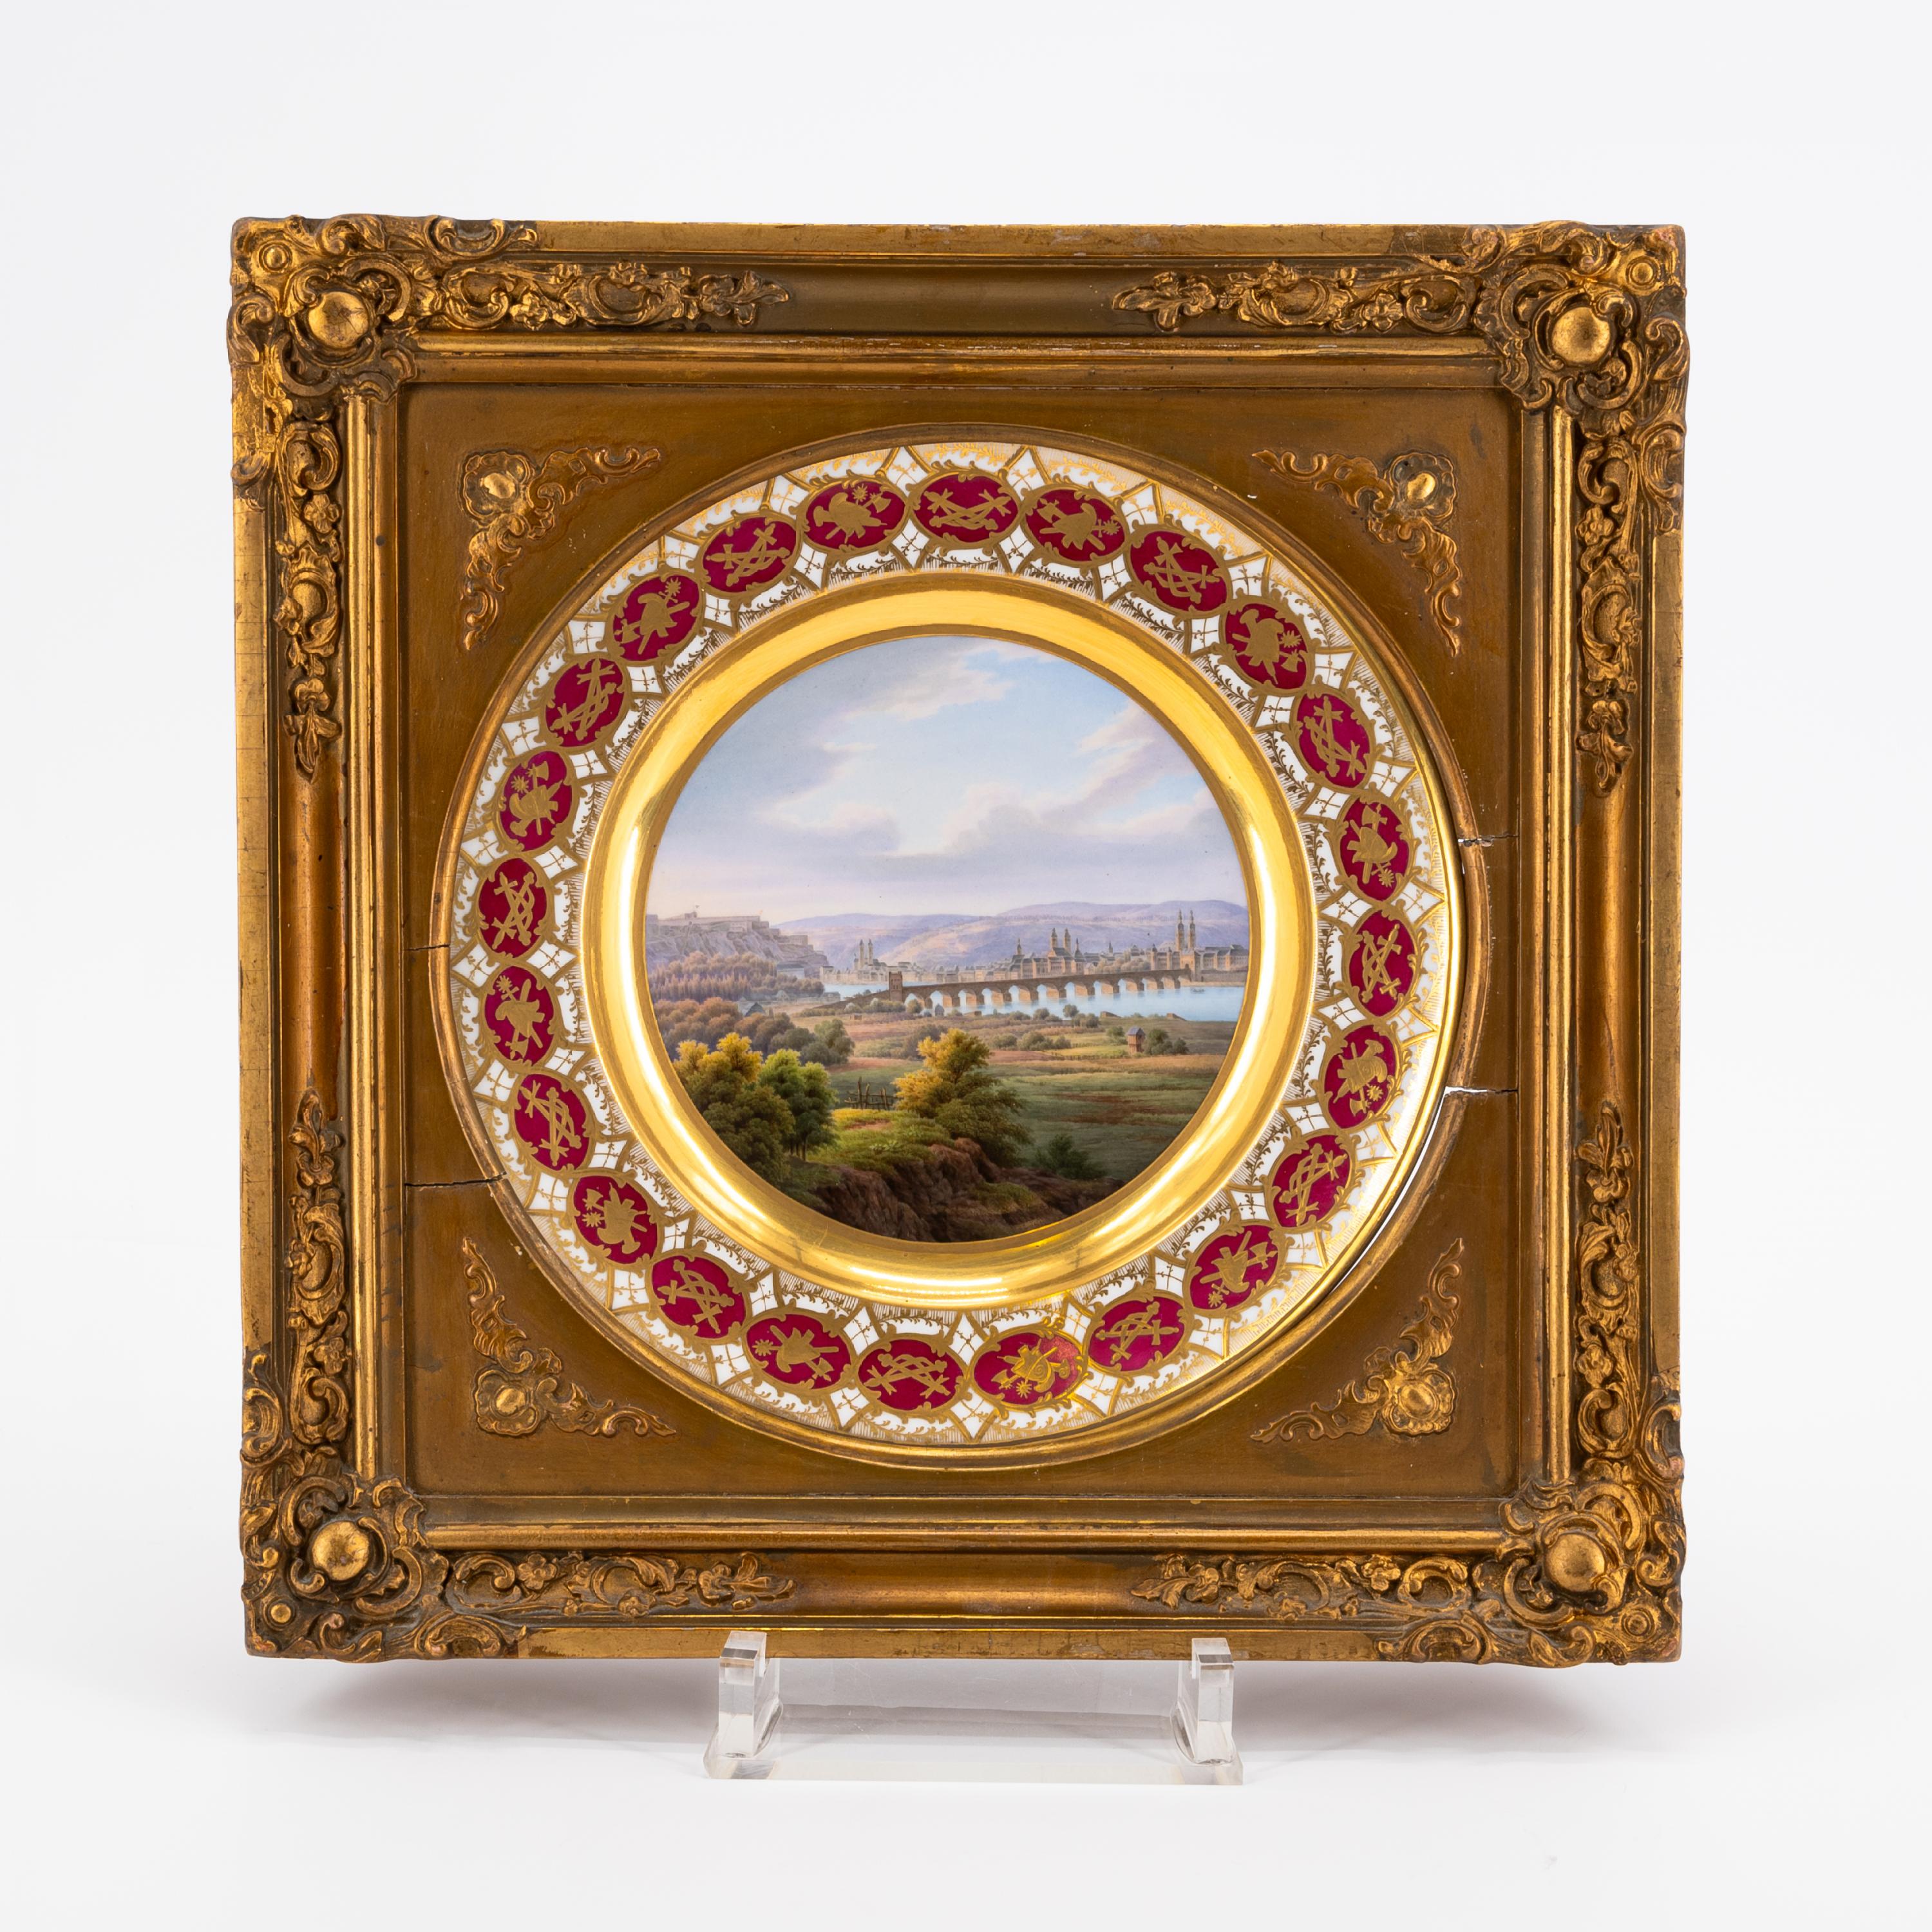 EXEPTIONAL SERIES OF TWELVE PORCELAIN PLATES WITH ROMANTIC VIEWS OF THE RHINE - Image 3 of 26